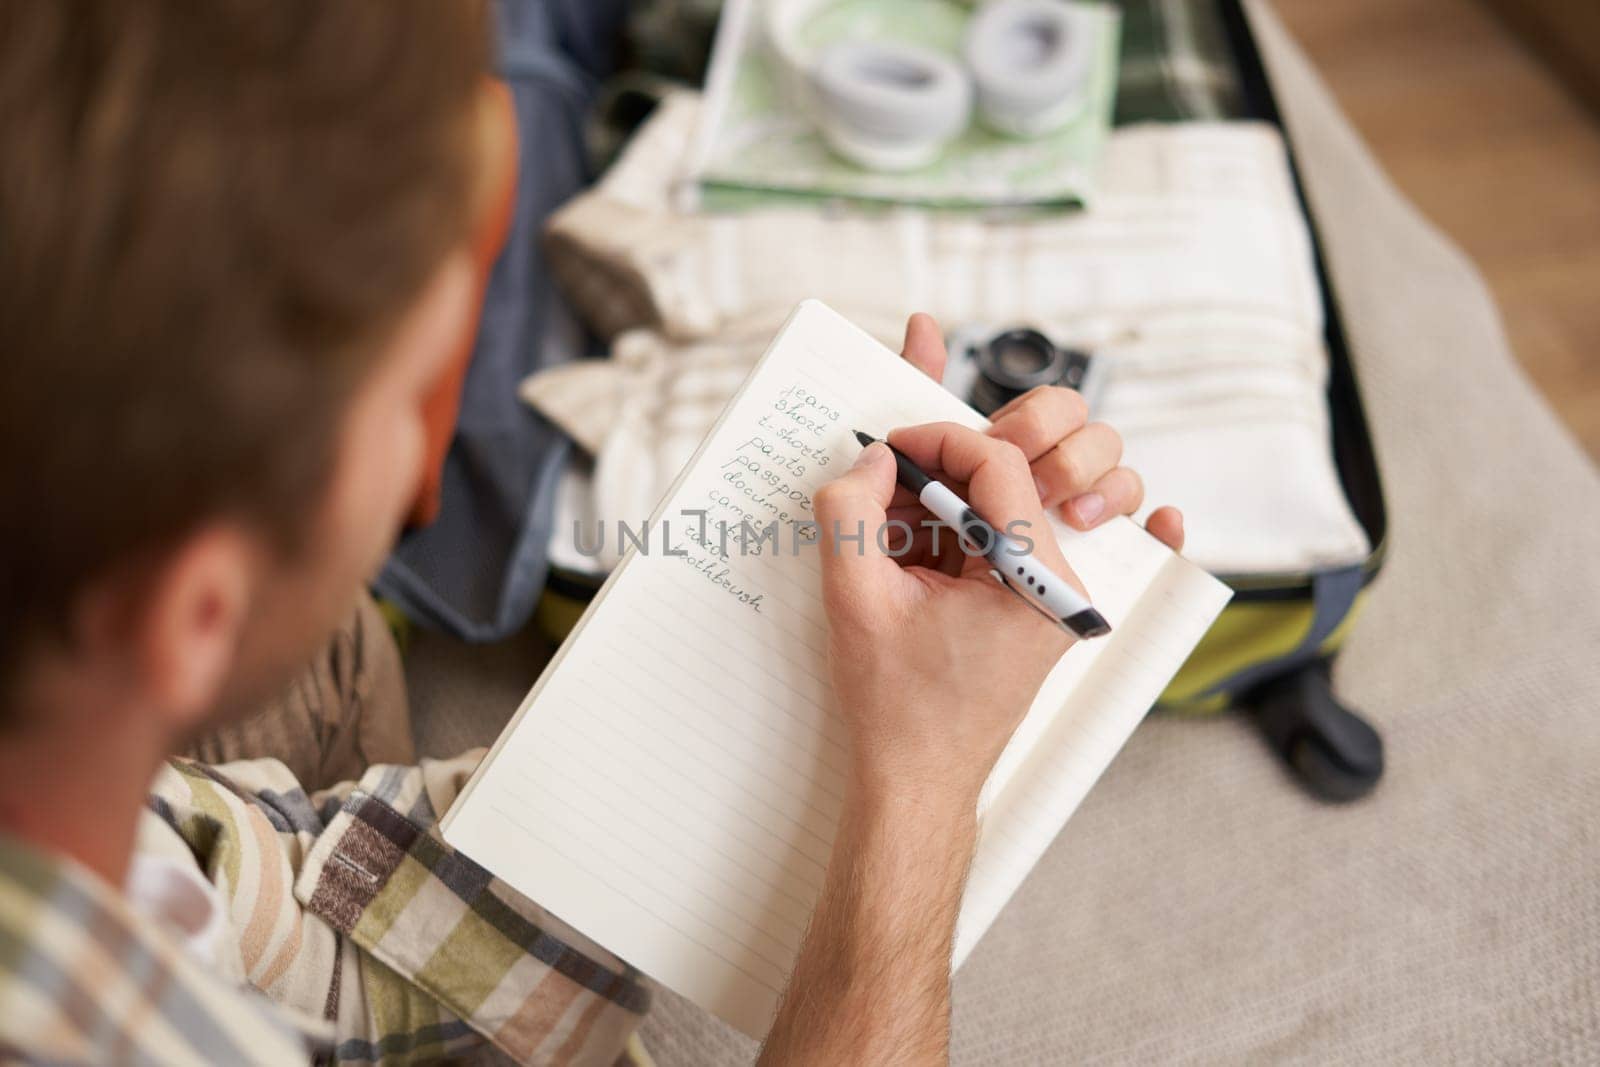 Close up portrait of man packing suitcase, making notes, check-list of items he wants to take on holiday, packing luggage.